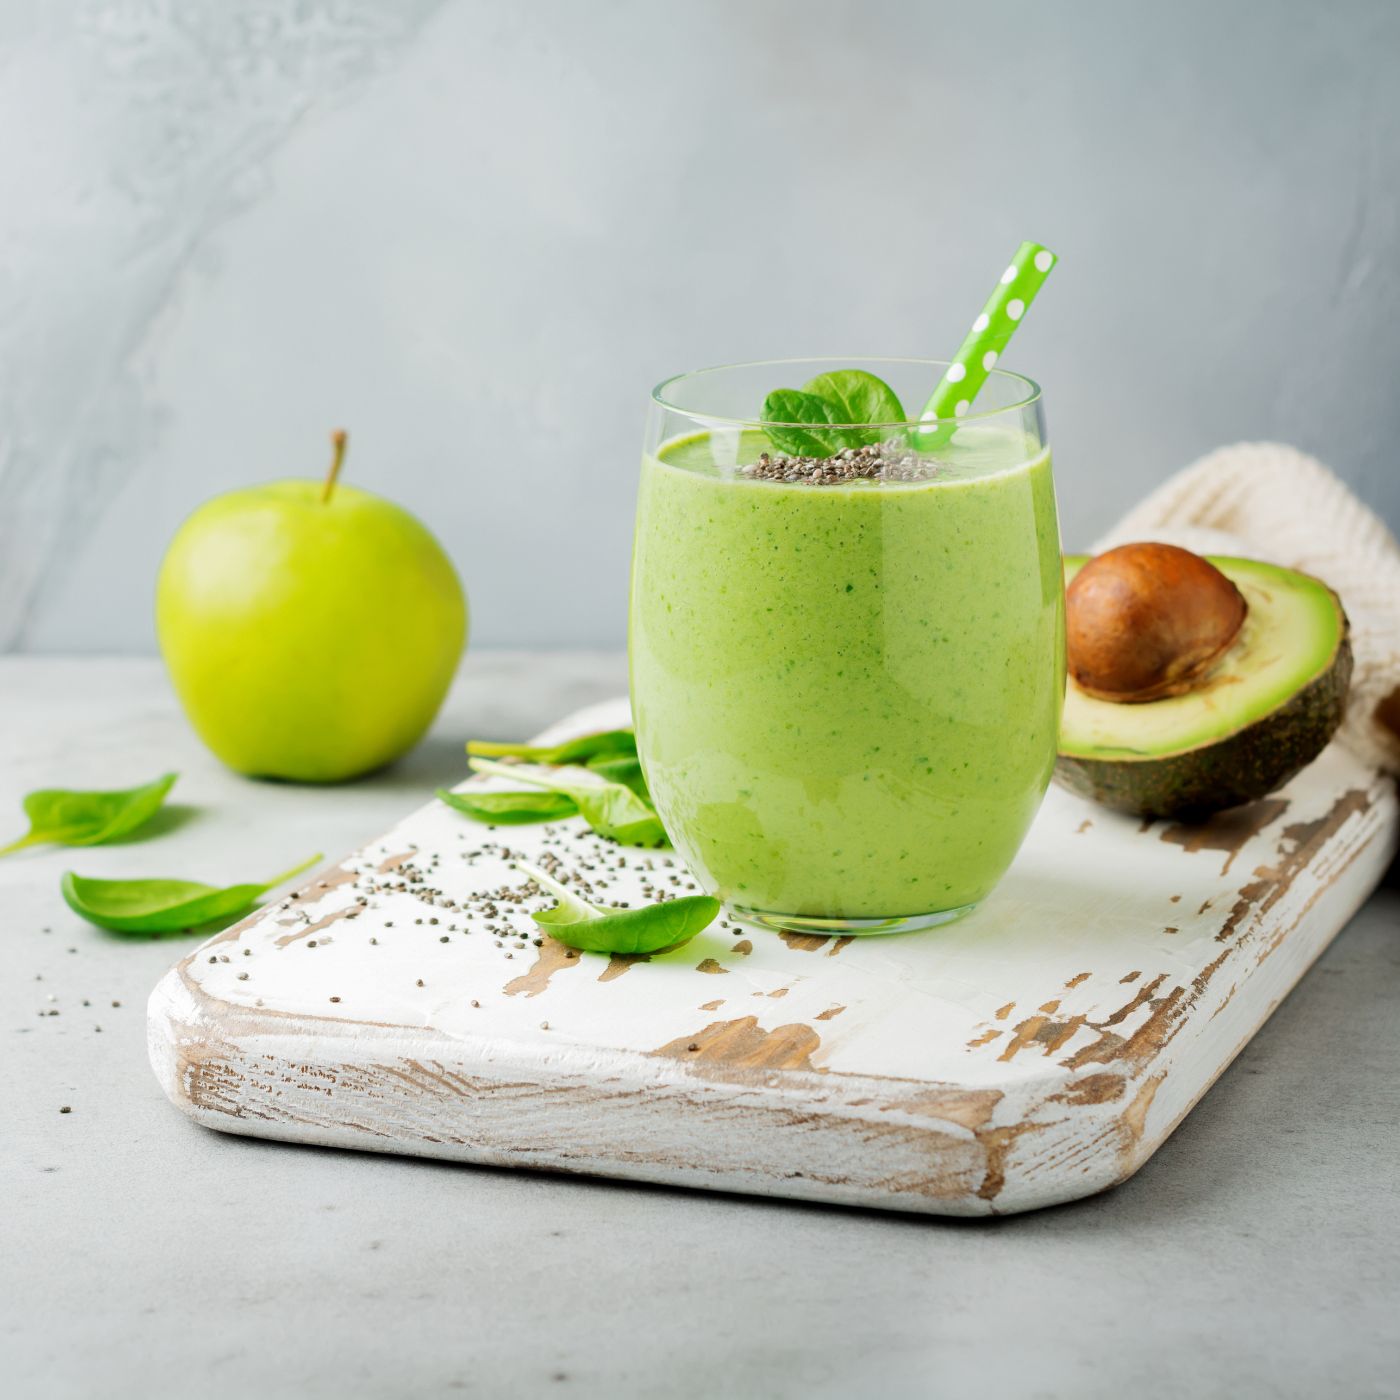 Vegetarian-healthy-green-smoothie-from-avocado,-spinach-leaves,-apple-and-chia-seeds-on-gray-concrete-background.-Selective-focus.-Space-for-text.-984772004_3869x2579 square.jpeg